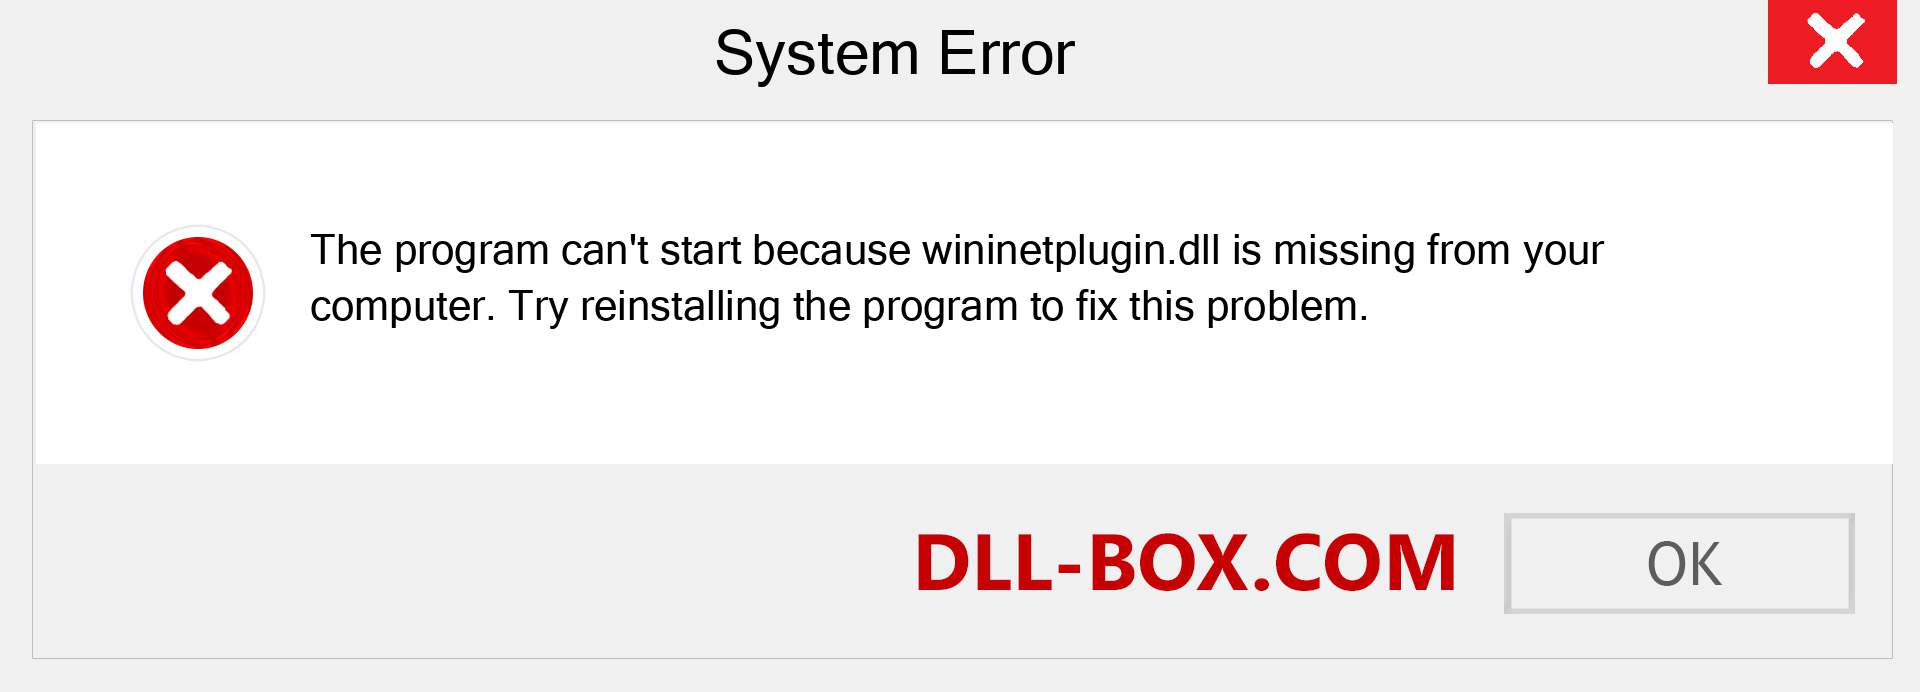  wininetplugin.dll file is missing?. Download for Windows 7, 8, 10 - Fix  wininetplugin dll Missing Error on Windows, photos, images